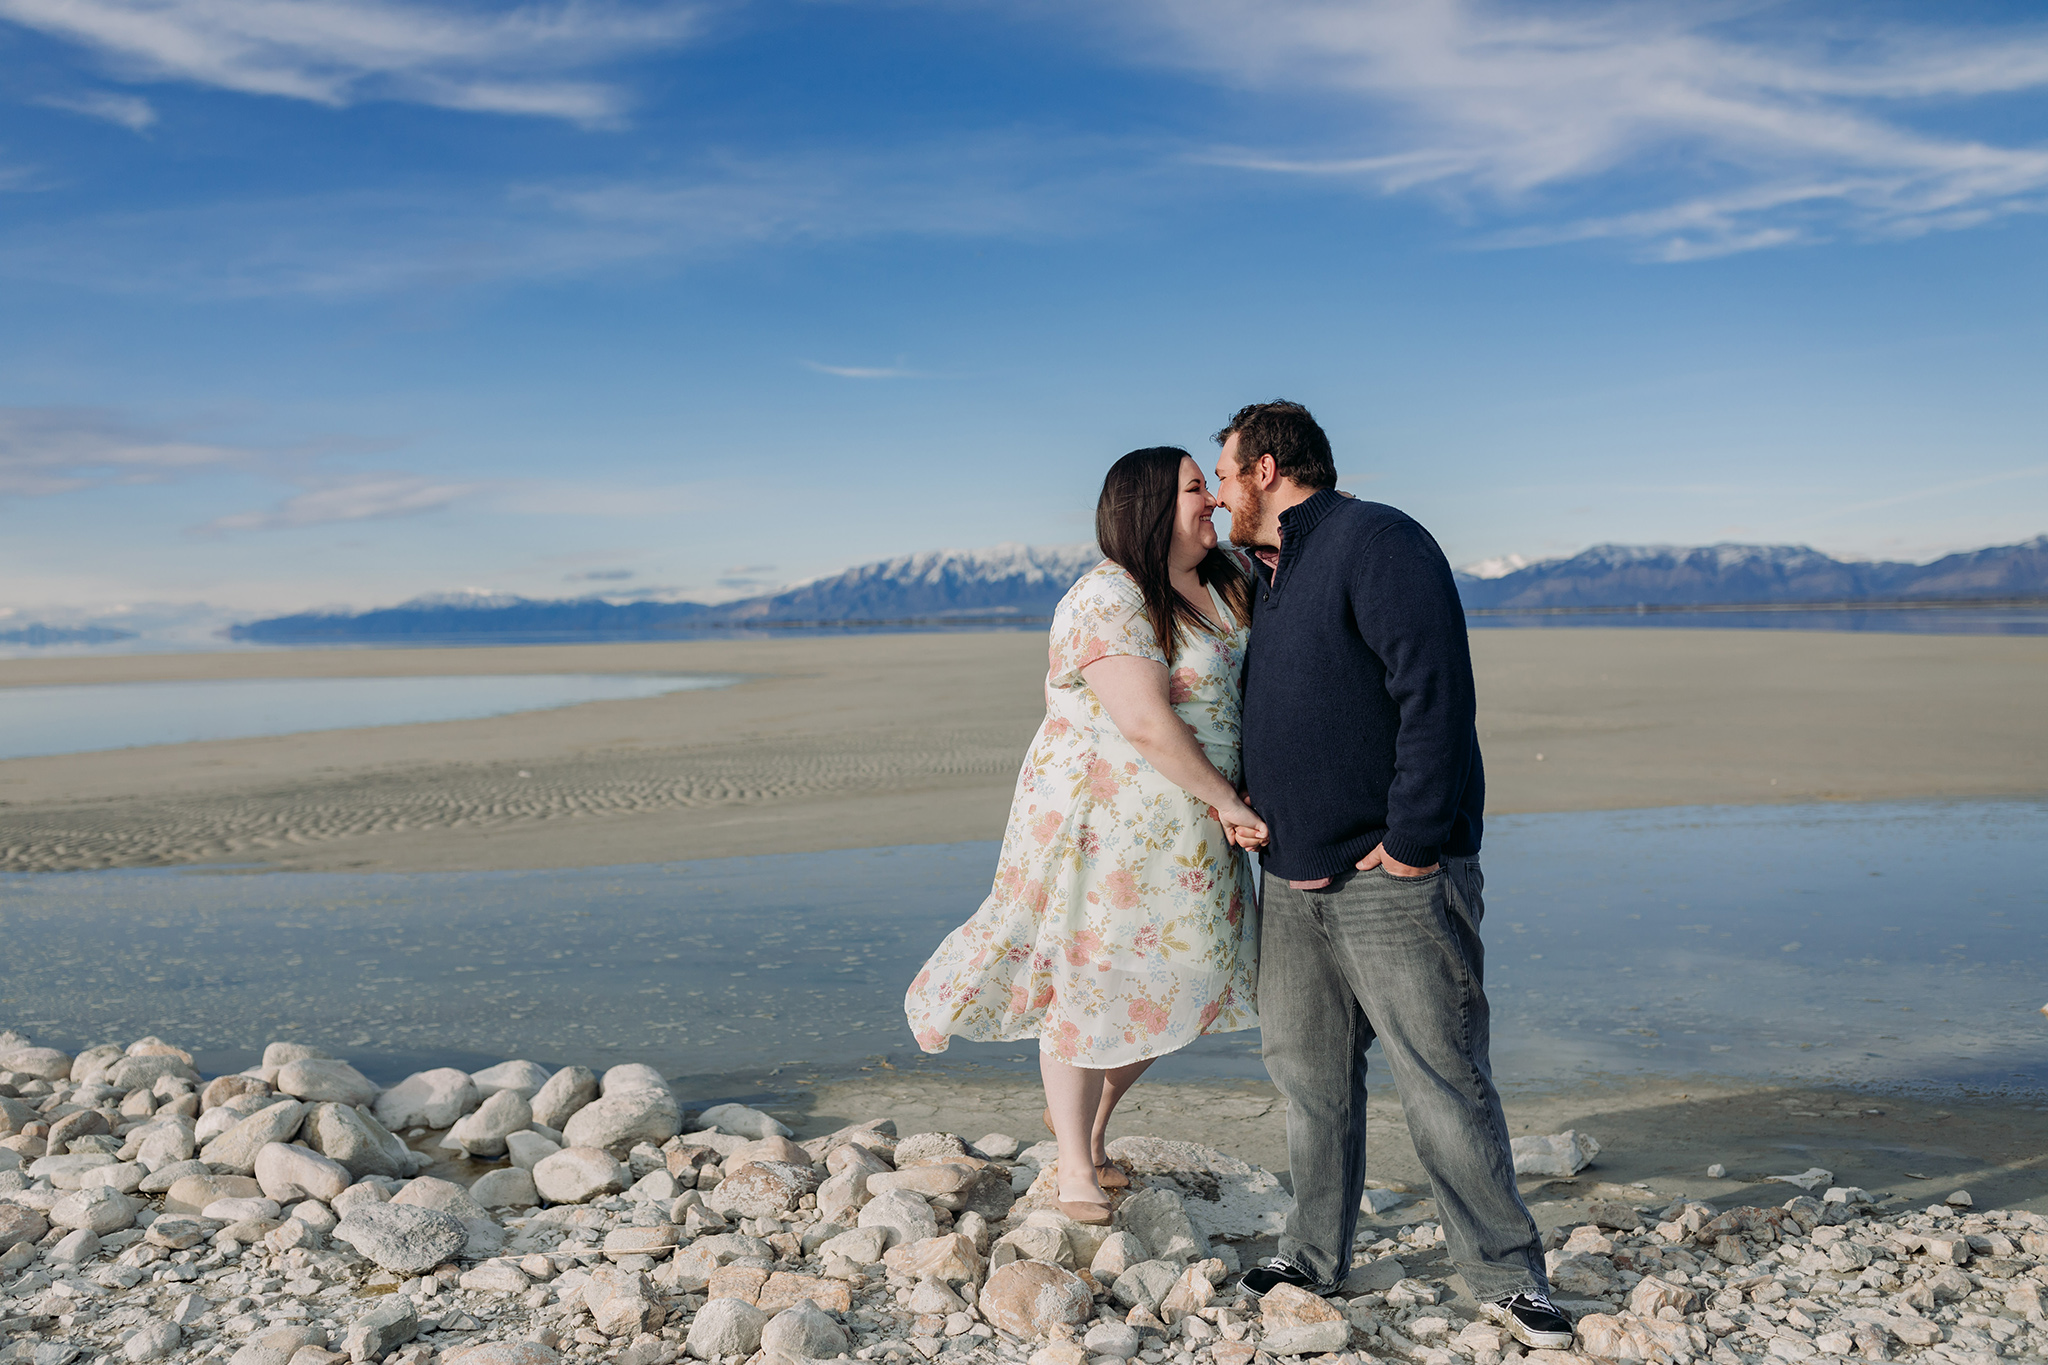 Antelope Island State Park Utah couples portraits in Spring. Exploring Utah with ENV Photography.